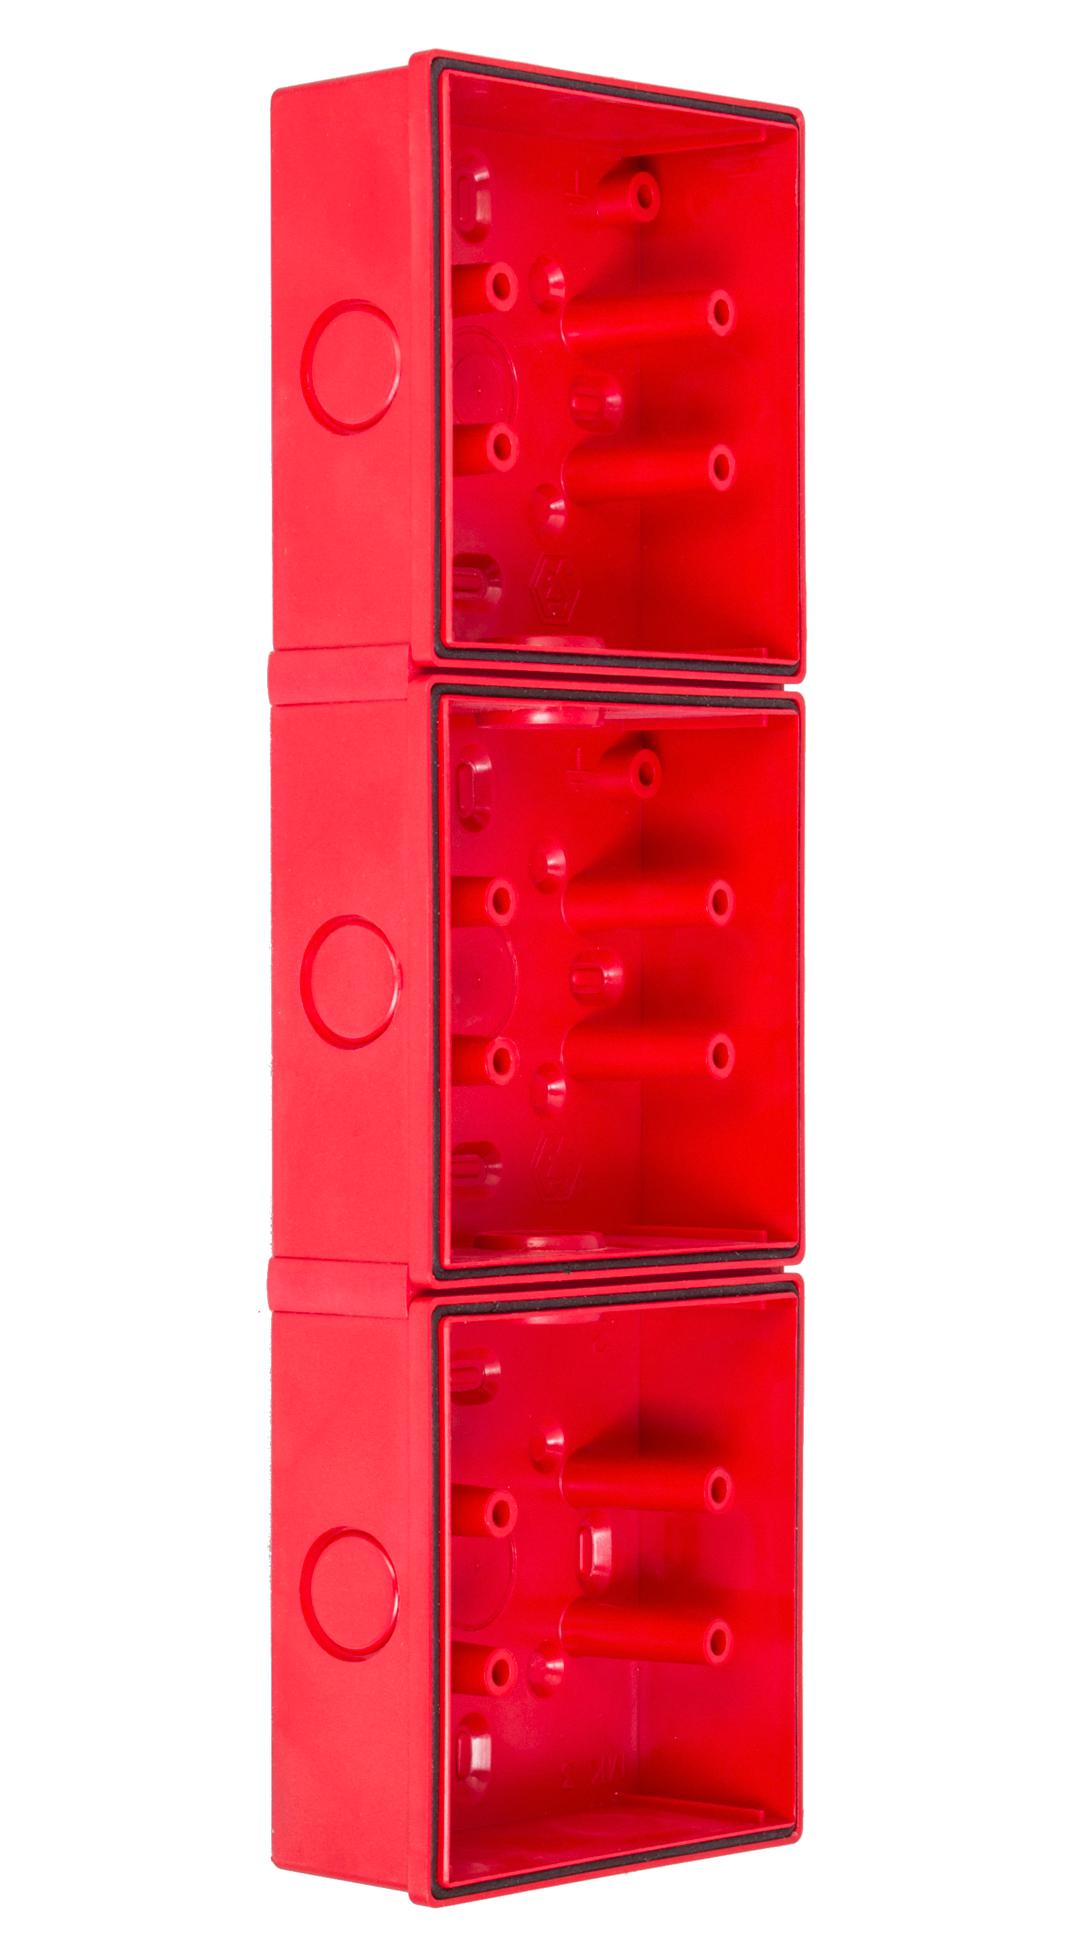 212888 TRIPLE BACK BOX, VISUAL SIGNAL INDICATOR CLIFFORD AND SNELL